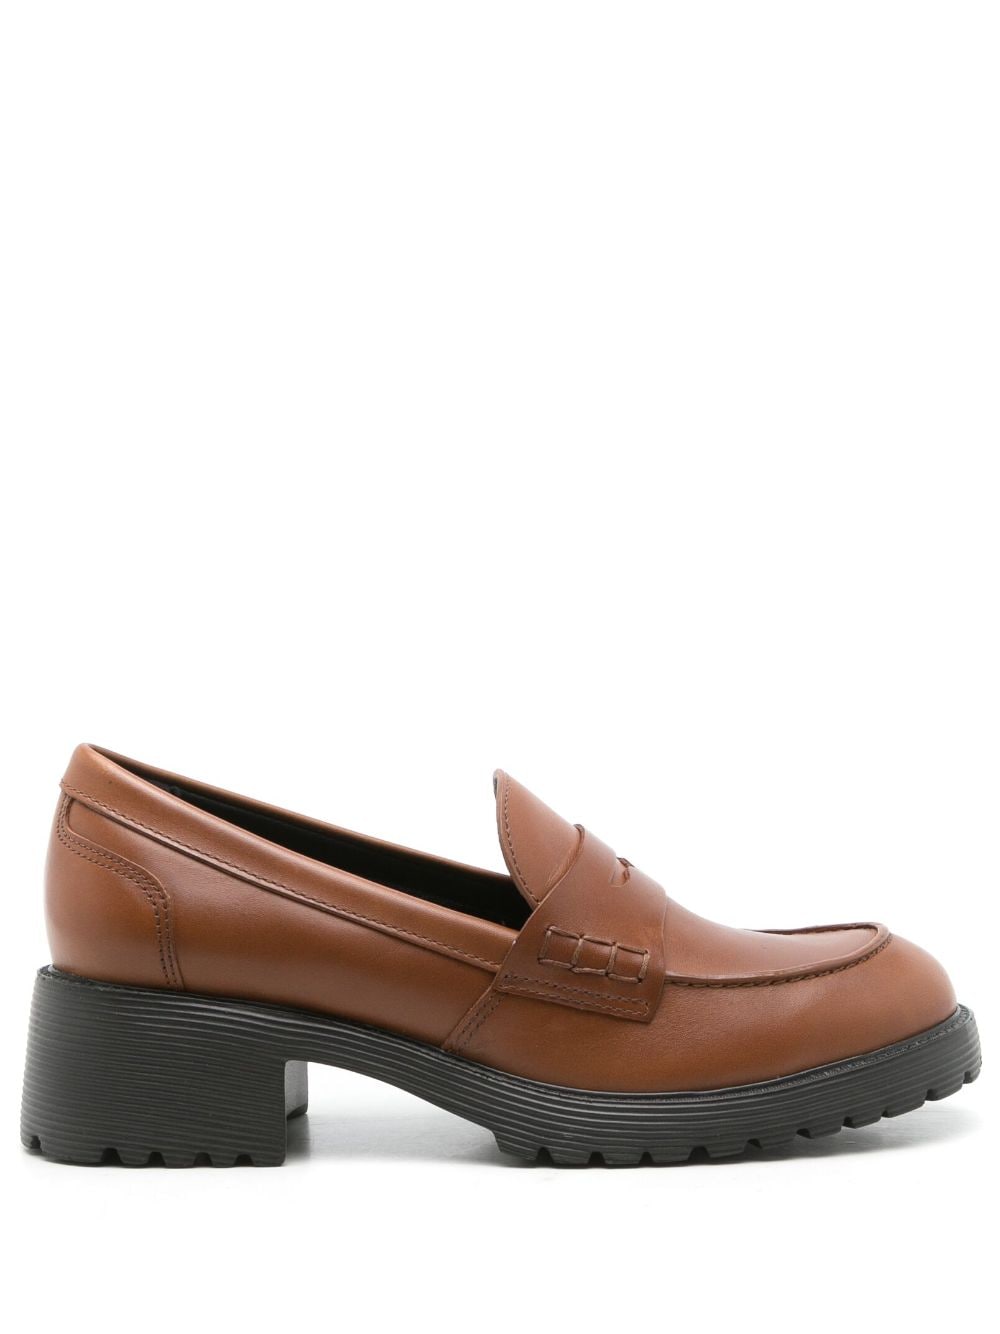 Sarah Chofakian Ully leather penny loafers - Brown von Sarah Chofakian